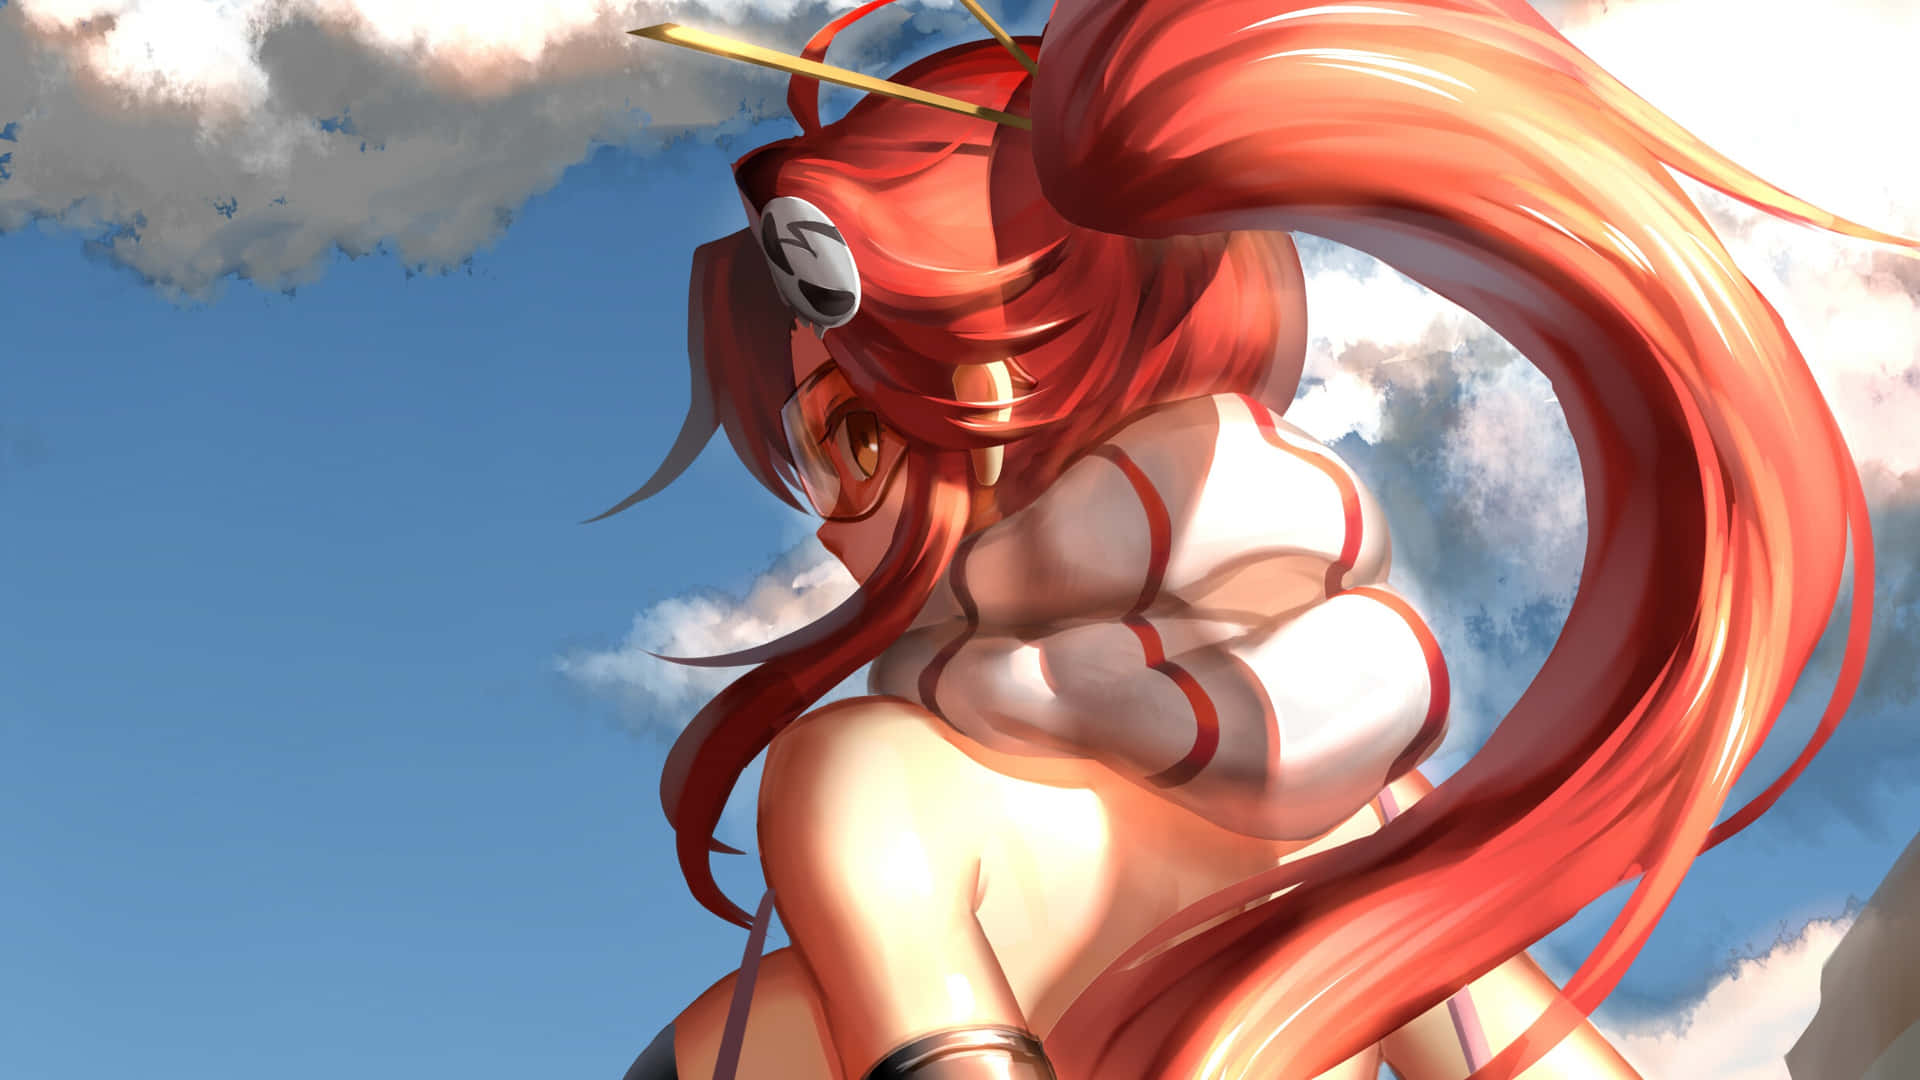 Yoko Littner displaying her combat prowess in a vibrant, action-packed anime setting Wallpaper